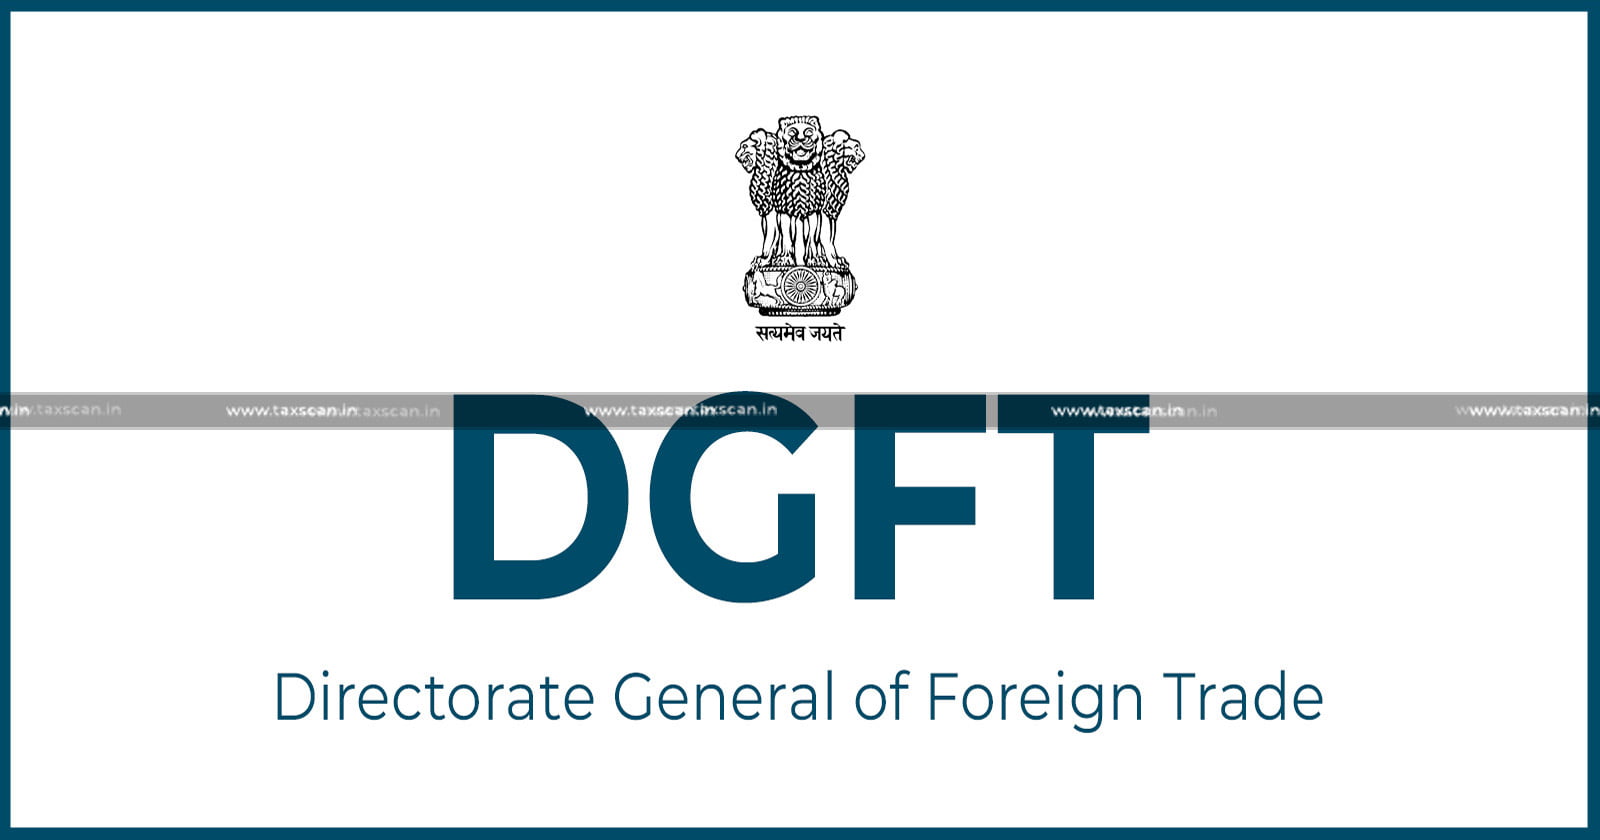 DGFT activates online mode to Review Norms of Advance Authorization by Norms Committee - TAXSCAN